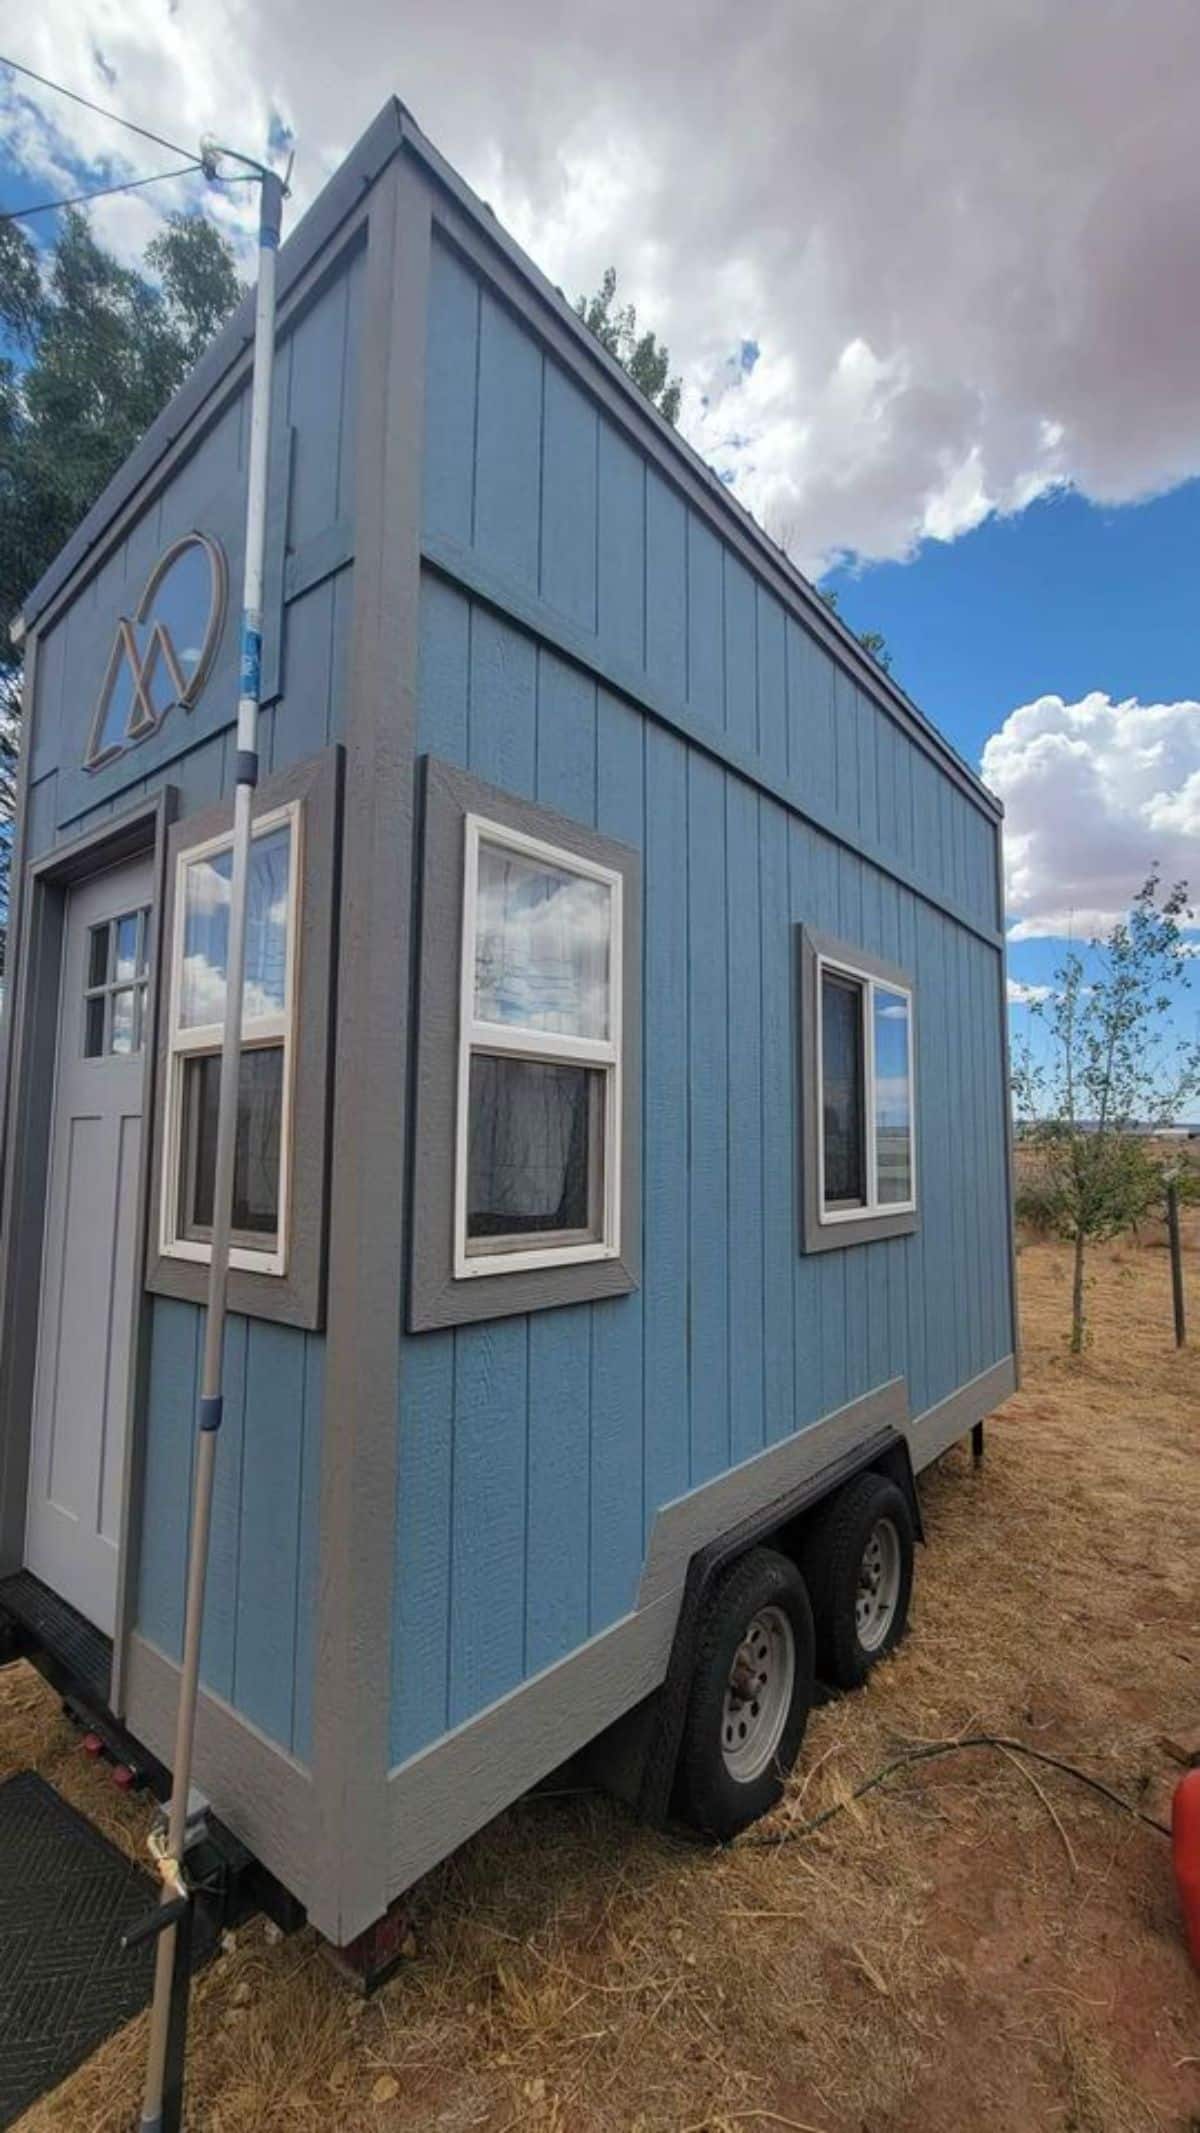 Huge windows all over the 14’ compact tiny house